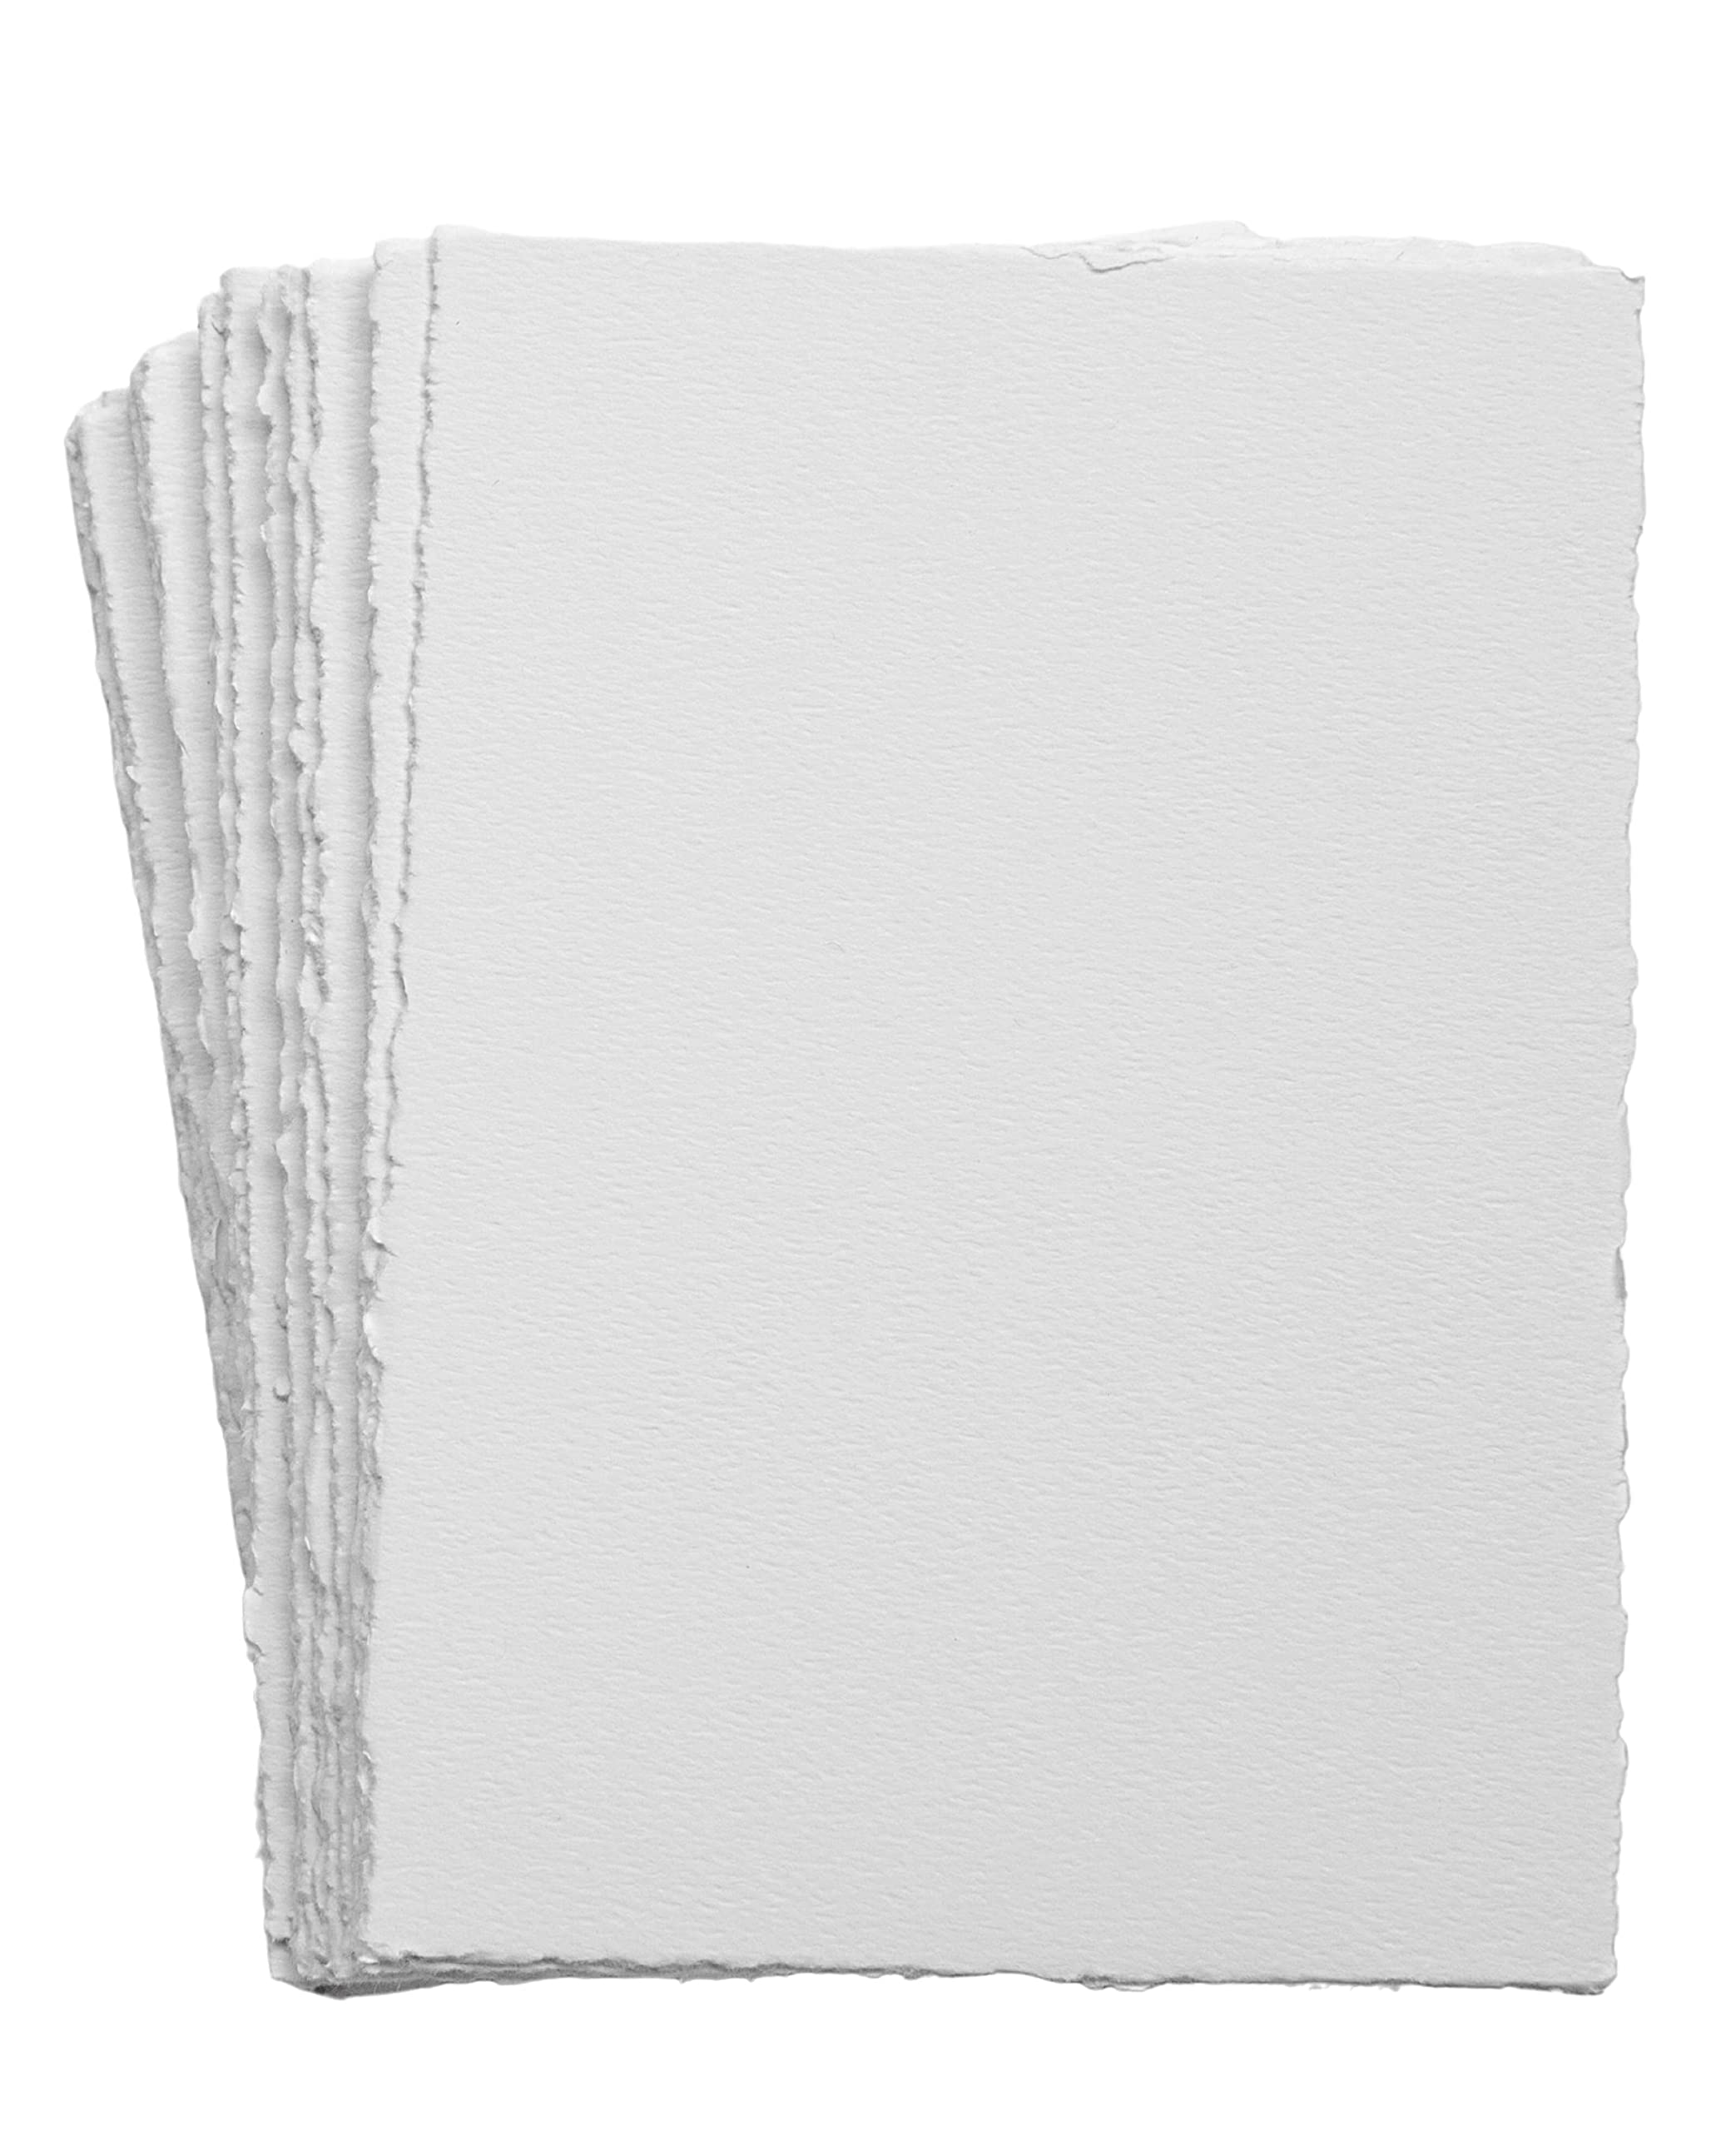 Blank Deckle Edge Sheets, 135#/290gsm, Soft White, 100% Cotton Rag, Cold Pressed, Acid Free & Archival Hand Torn Watercolor Paper (4.5x6.25 in Sheets Only, Set of 12)